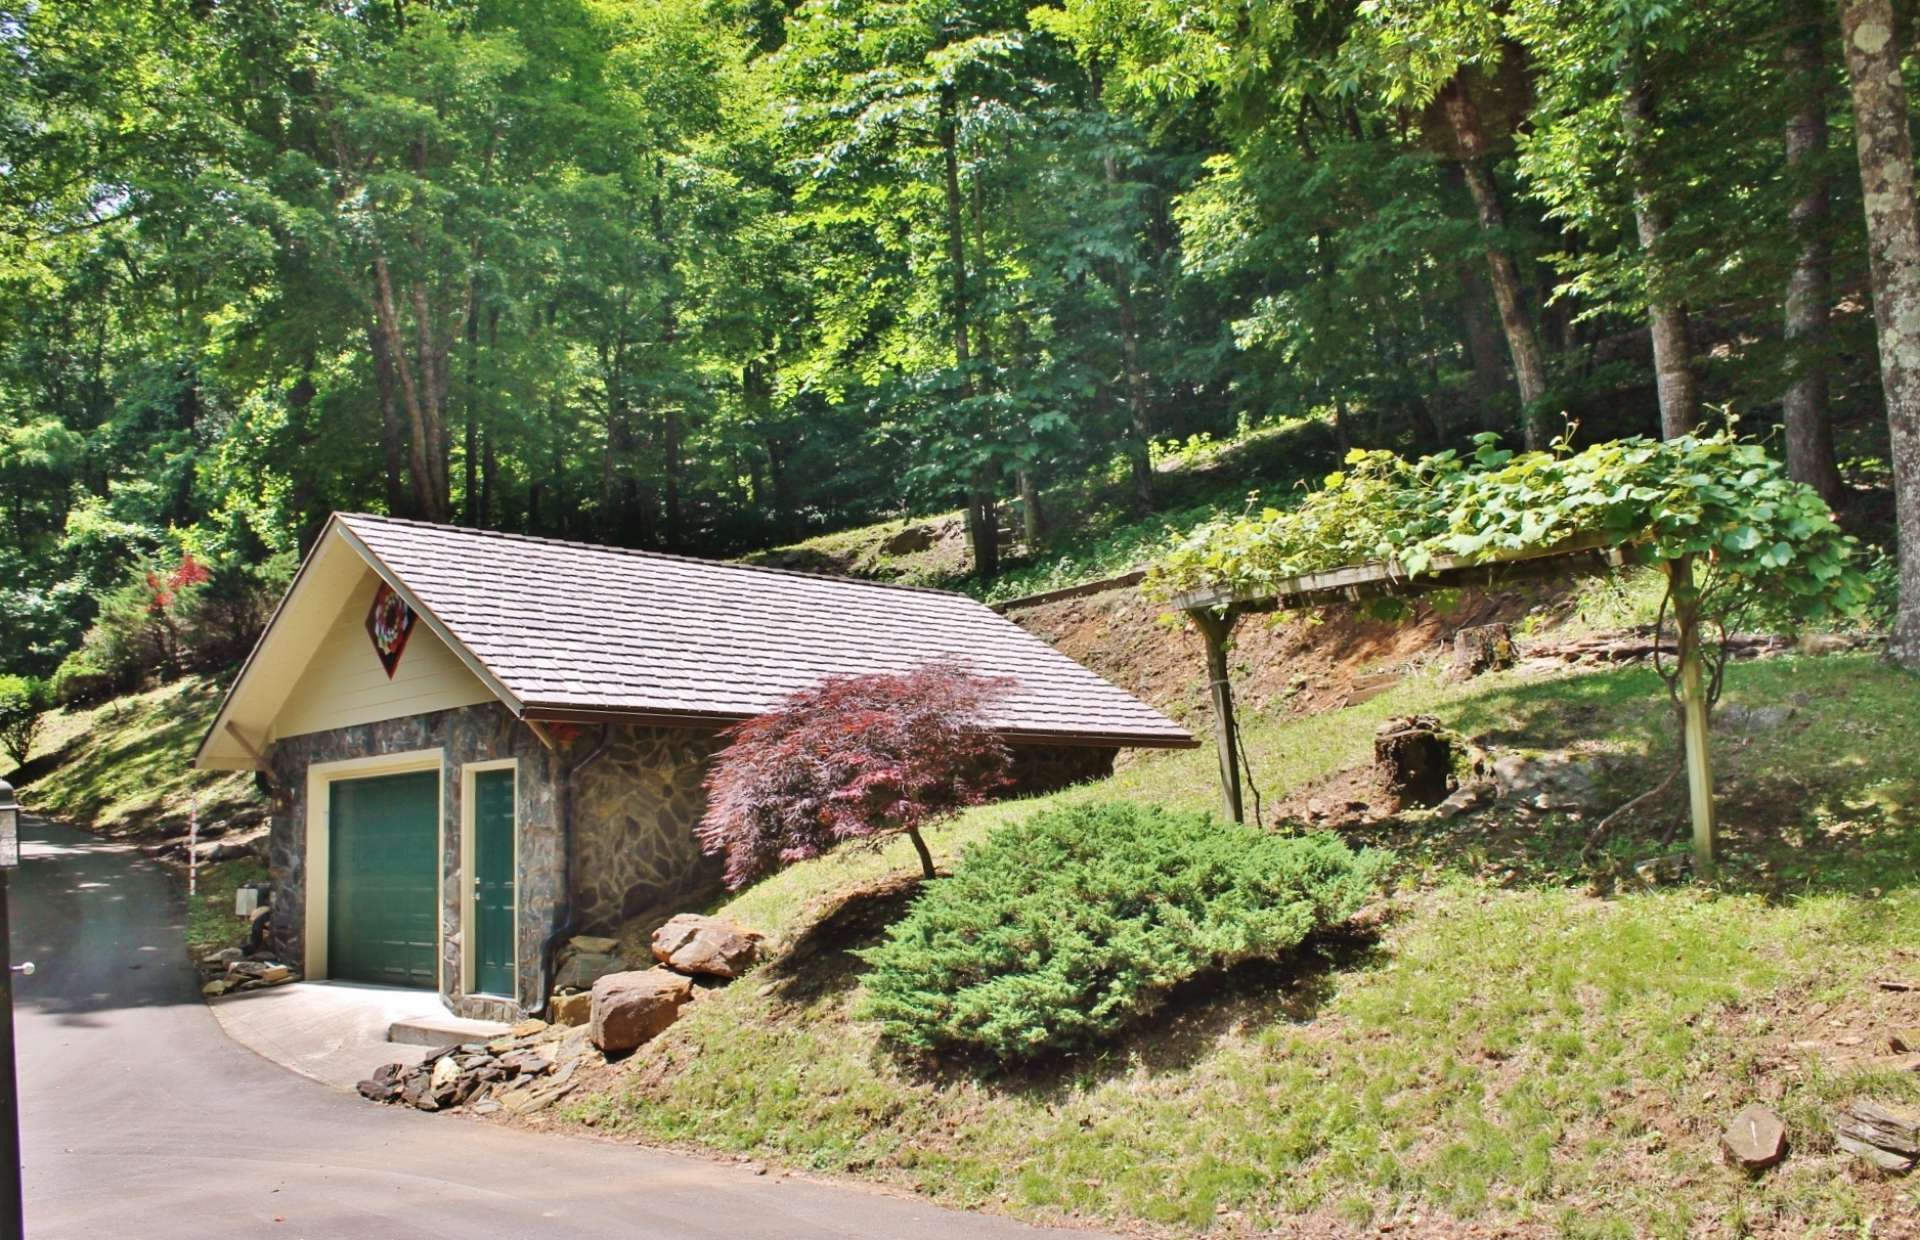 A quiet road, canopied with native mountain laurel and hardwoods, leads to the paved driveway with detached garage and lovely landscaped entrance.